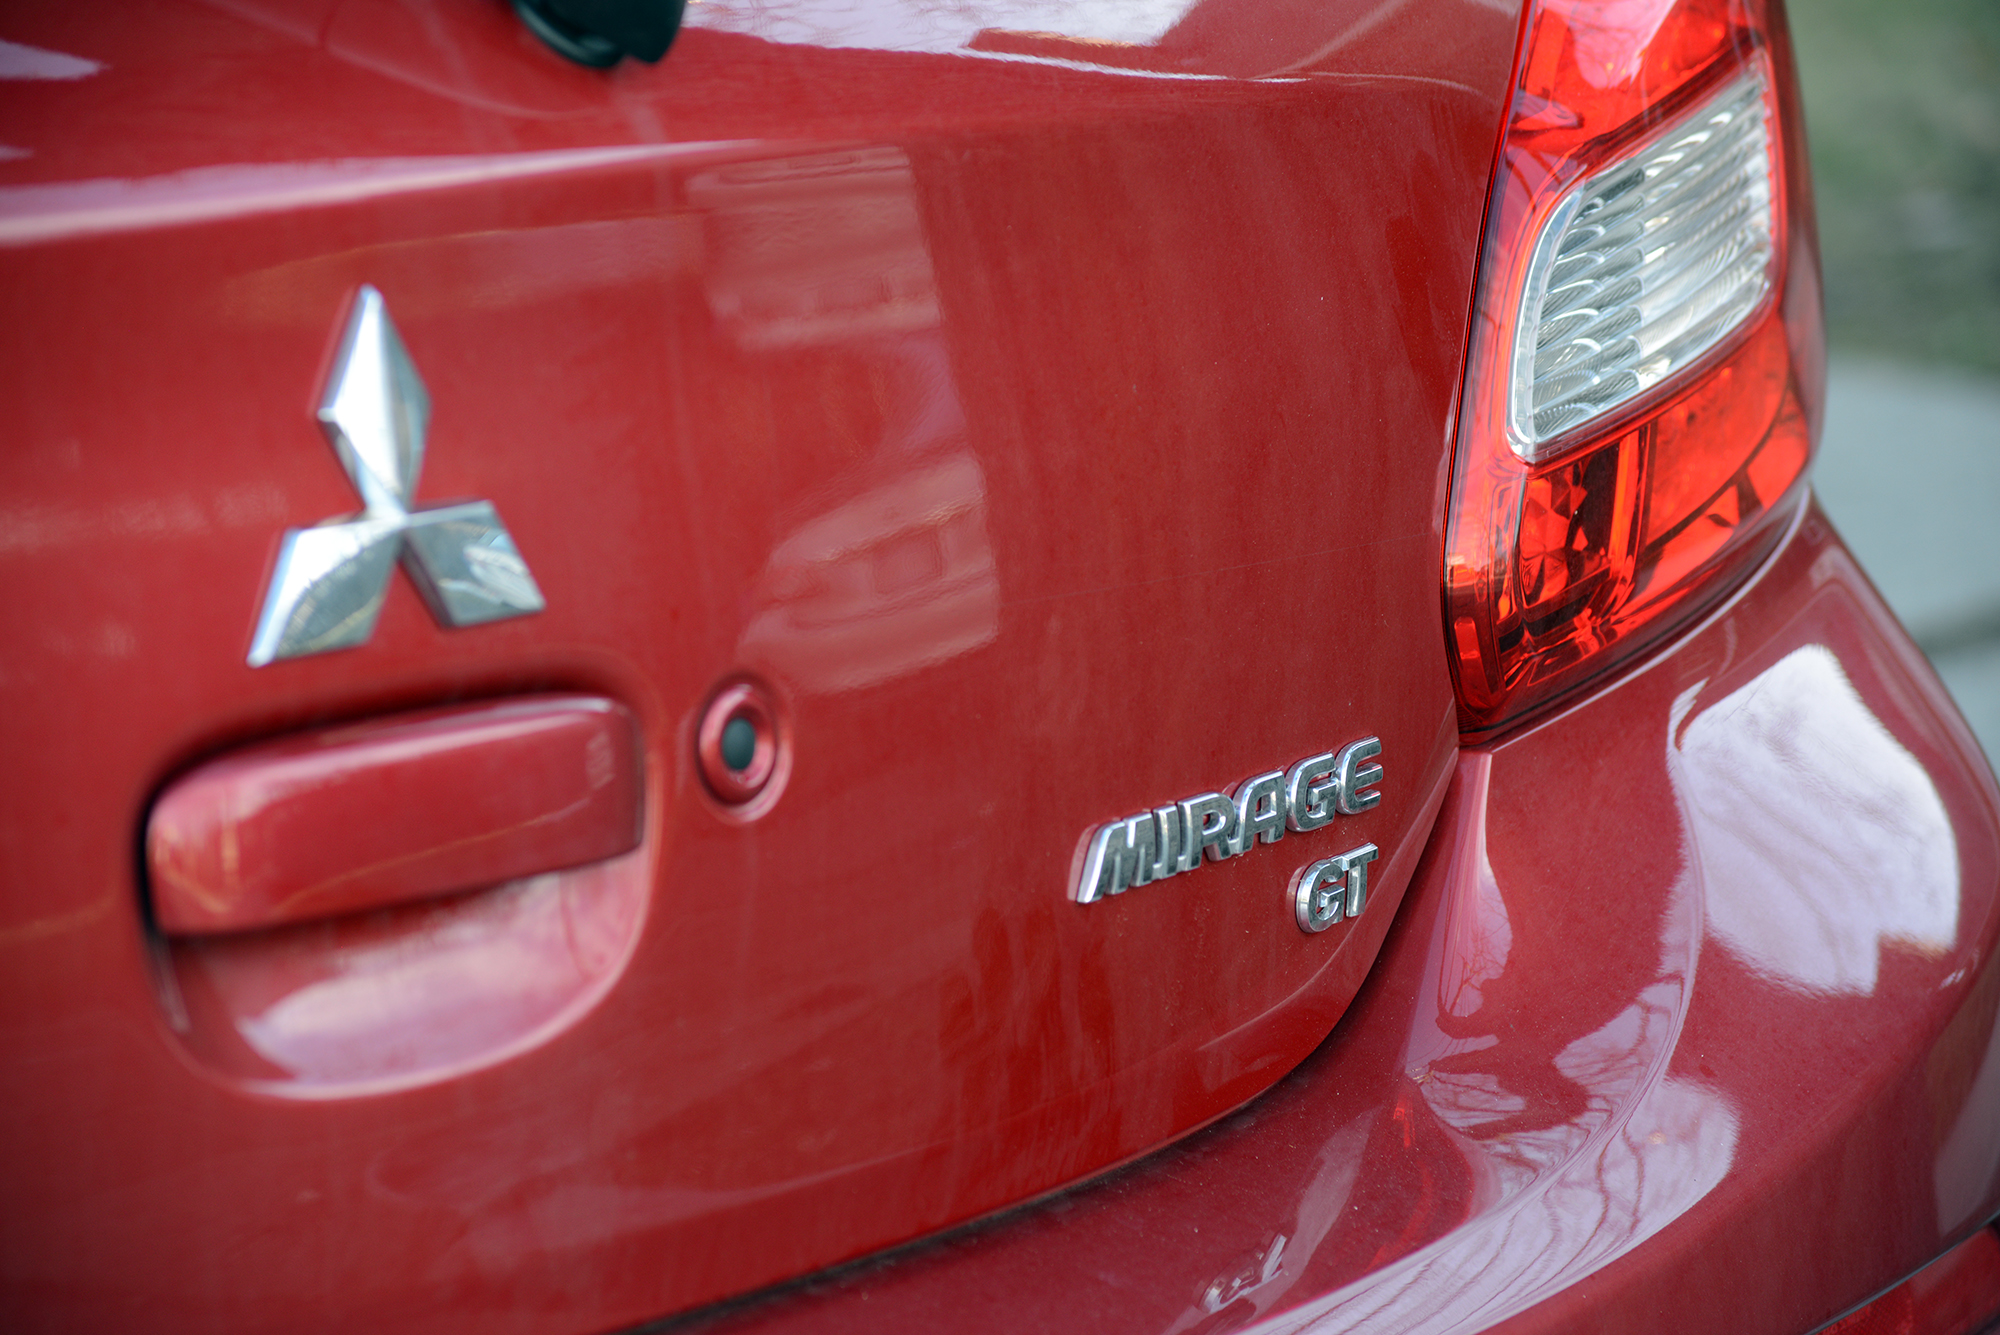 Red rear of a 2018 Mitsubishi Mirage GT.